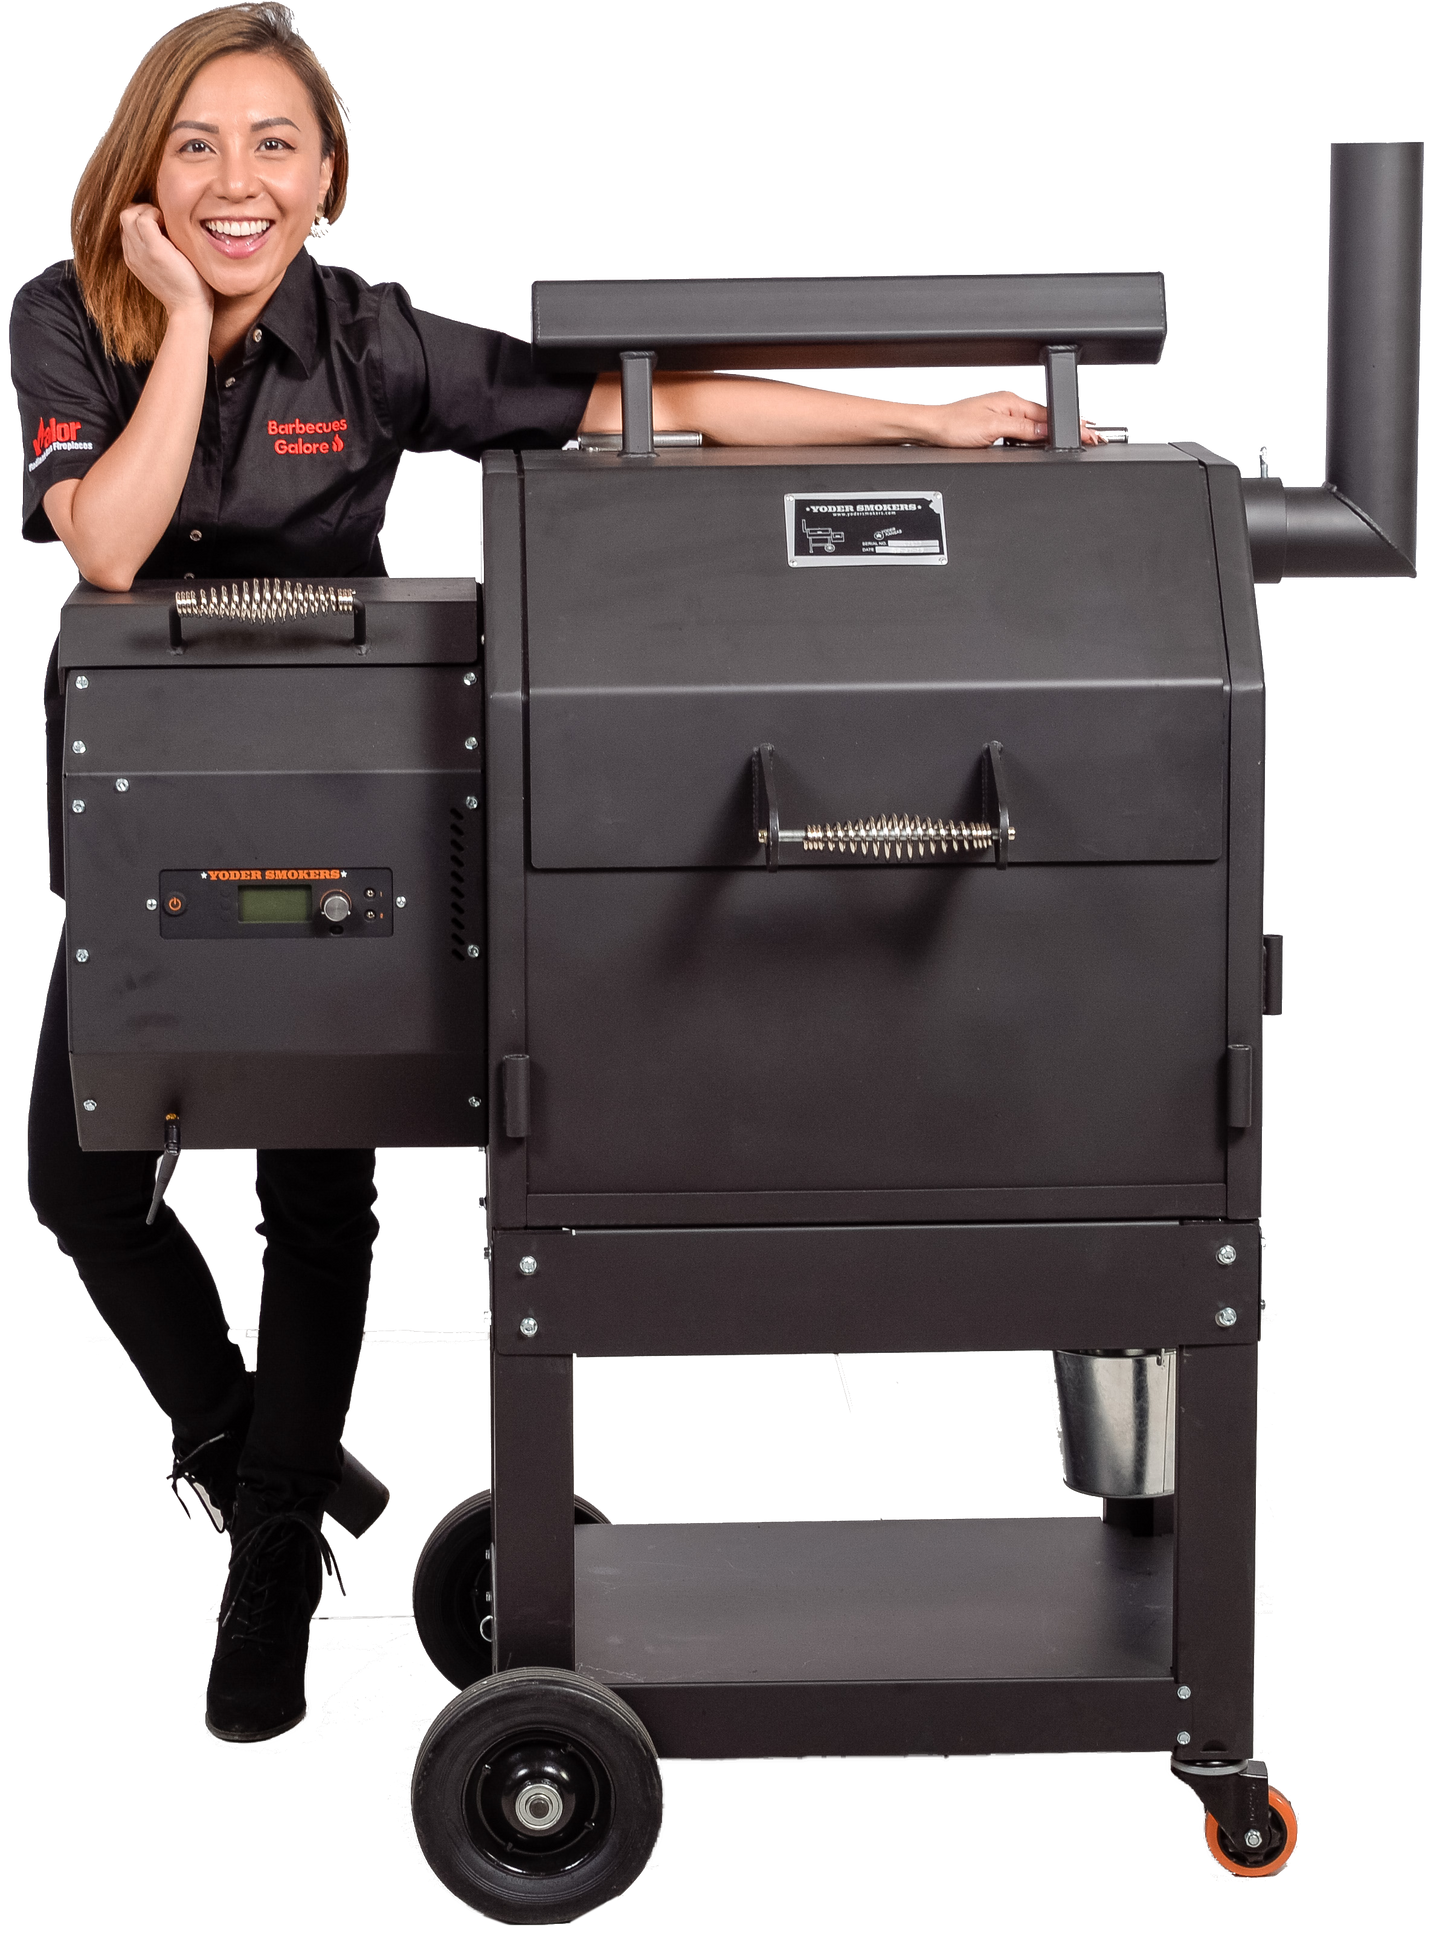 Yoder Smokers YS480s Pellet Grill with ACS – BBQ Europe